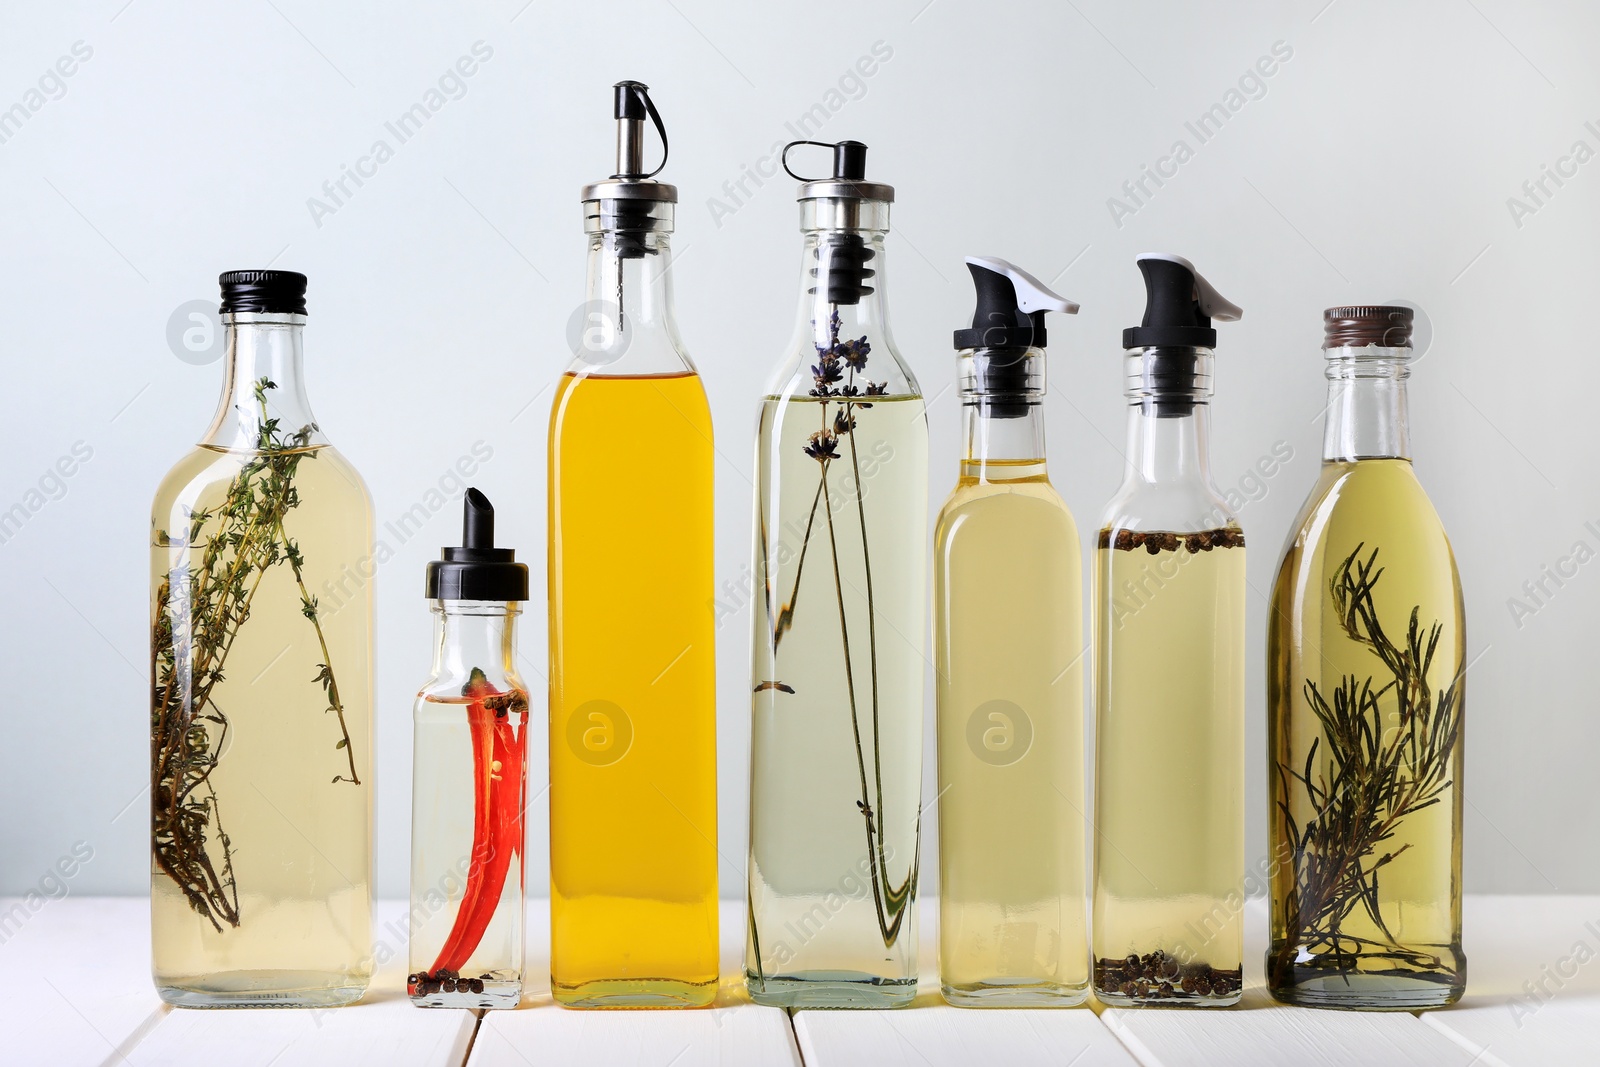 Photo of Bottles of different cooking oils on white wooden table against light background